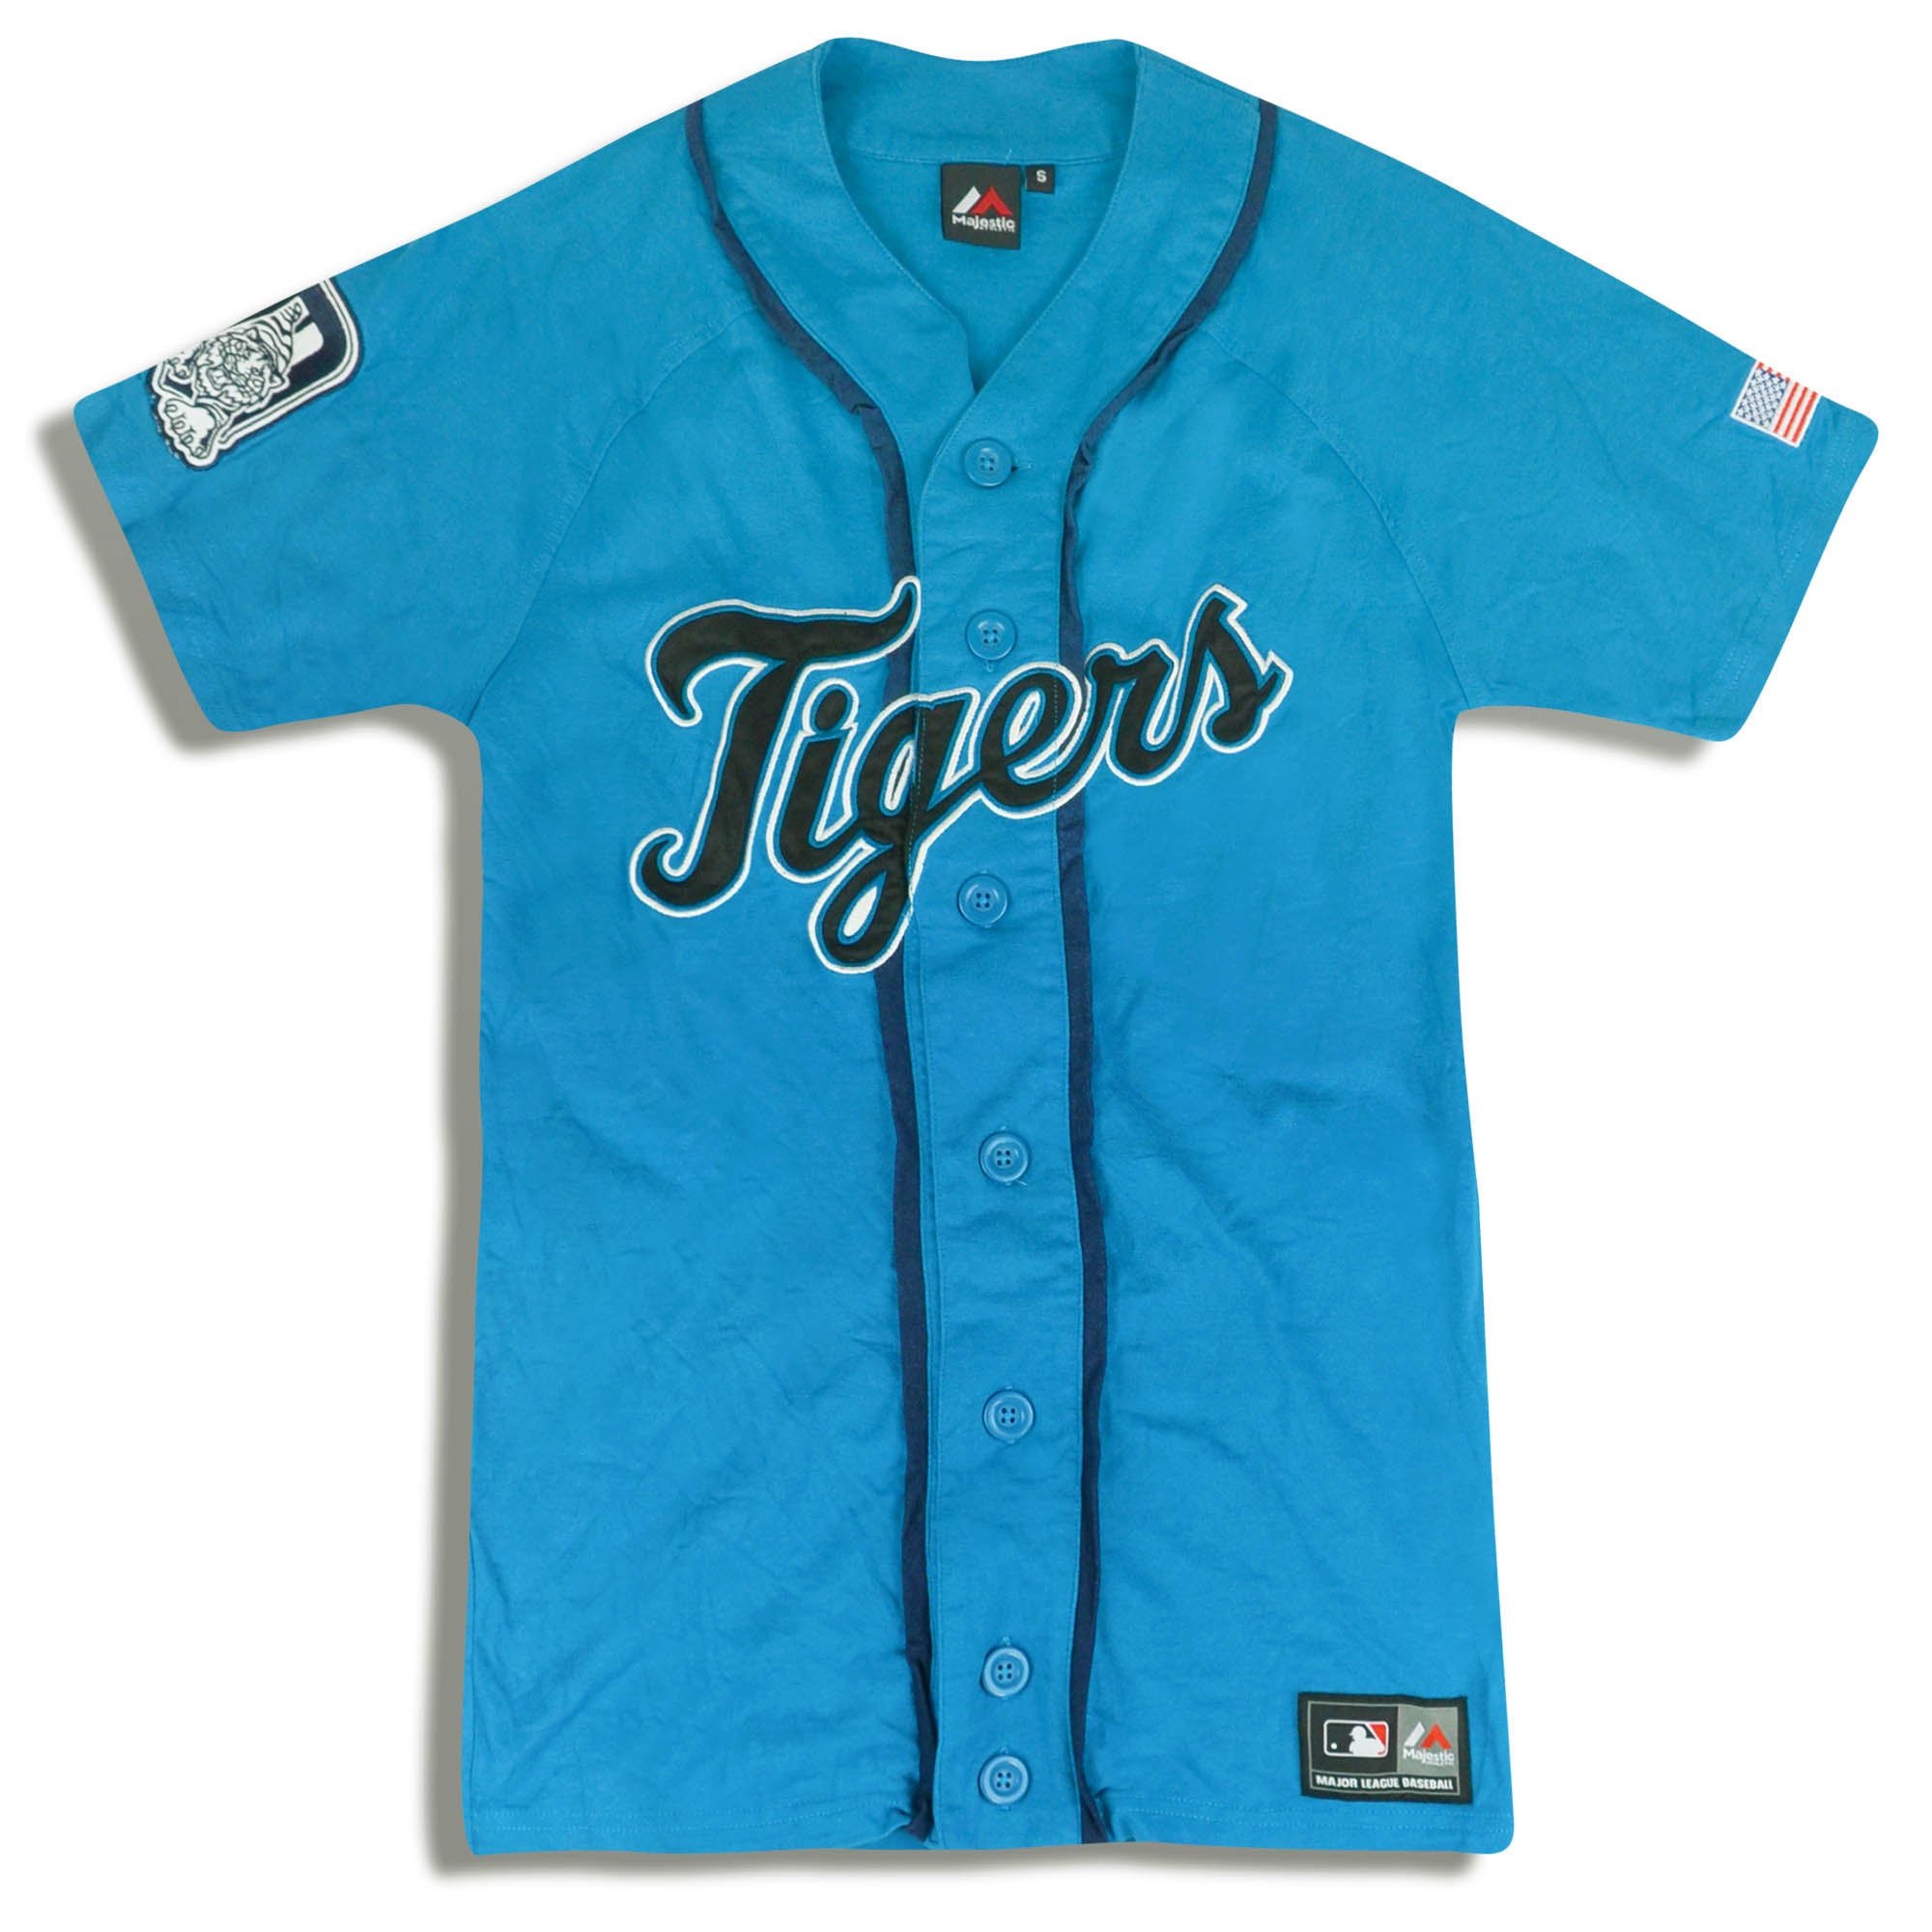 2000's DETROIT TIGERS MAJESTIC JERSEY S